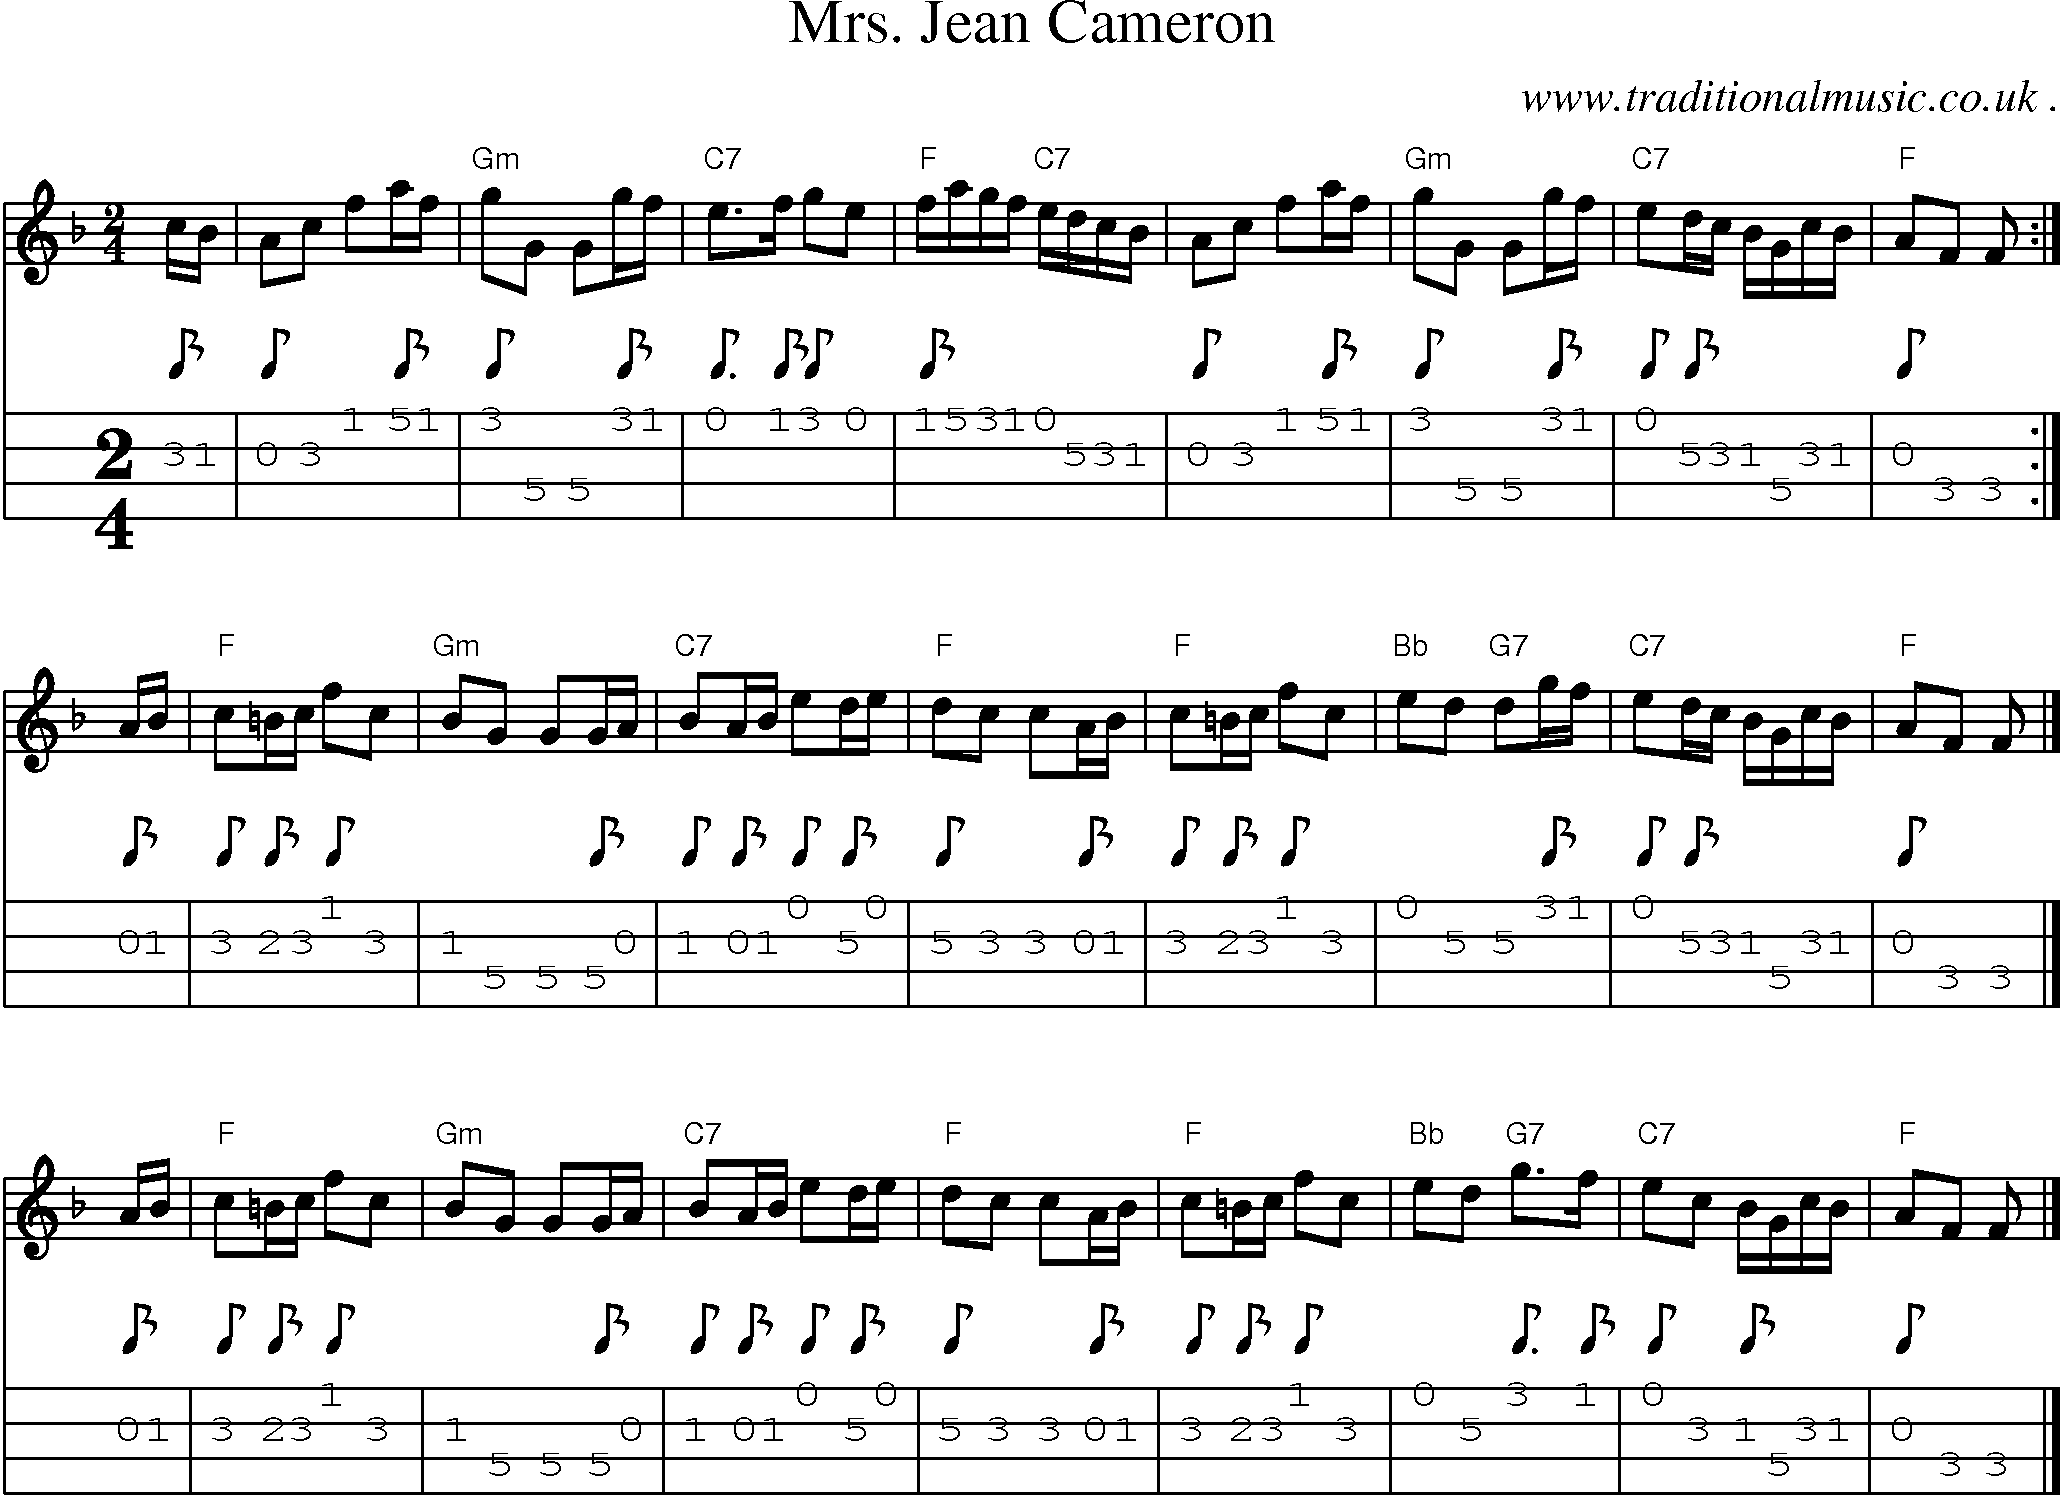 Sheet-music  score, Chords and Mandolin Tabs for Mrs Jean Cameron